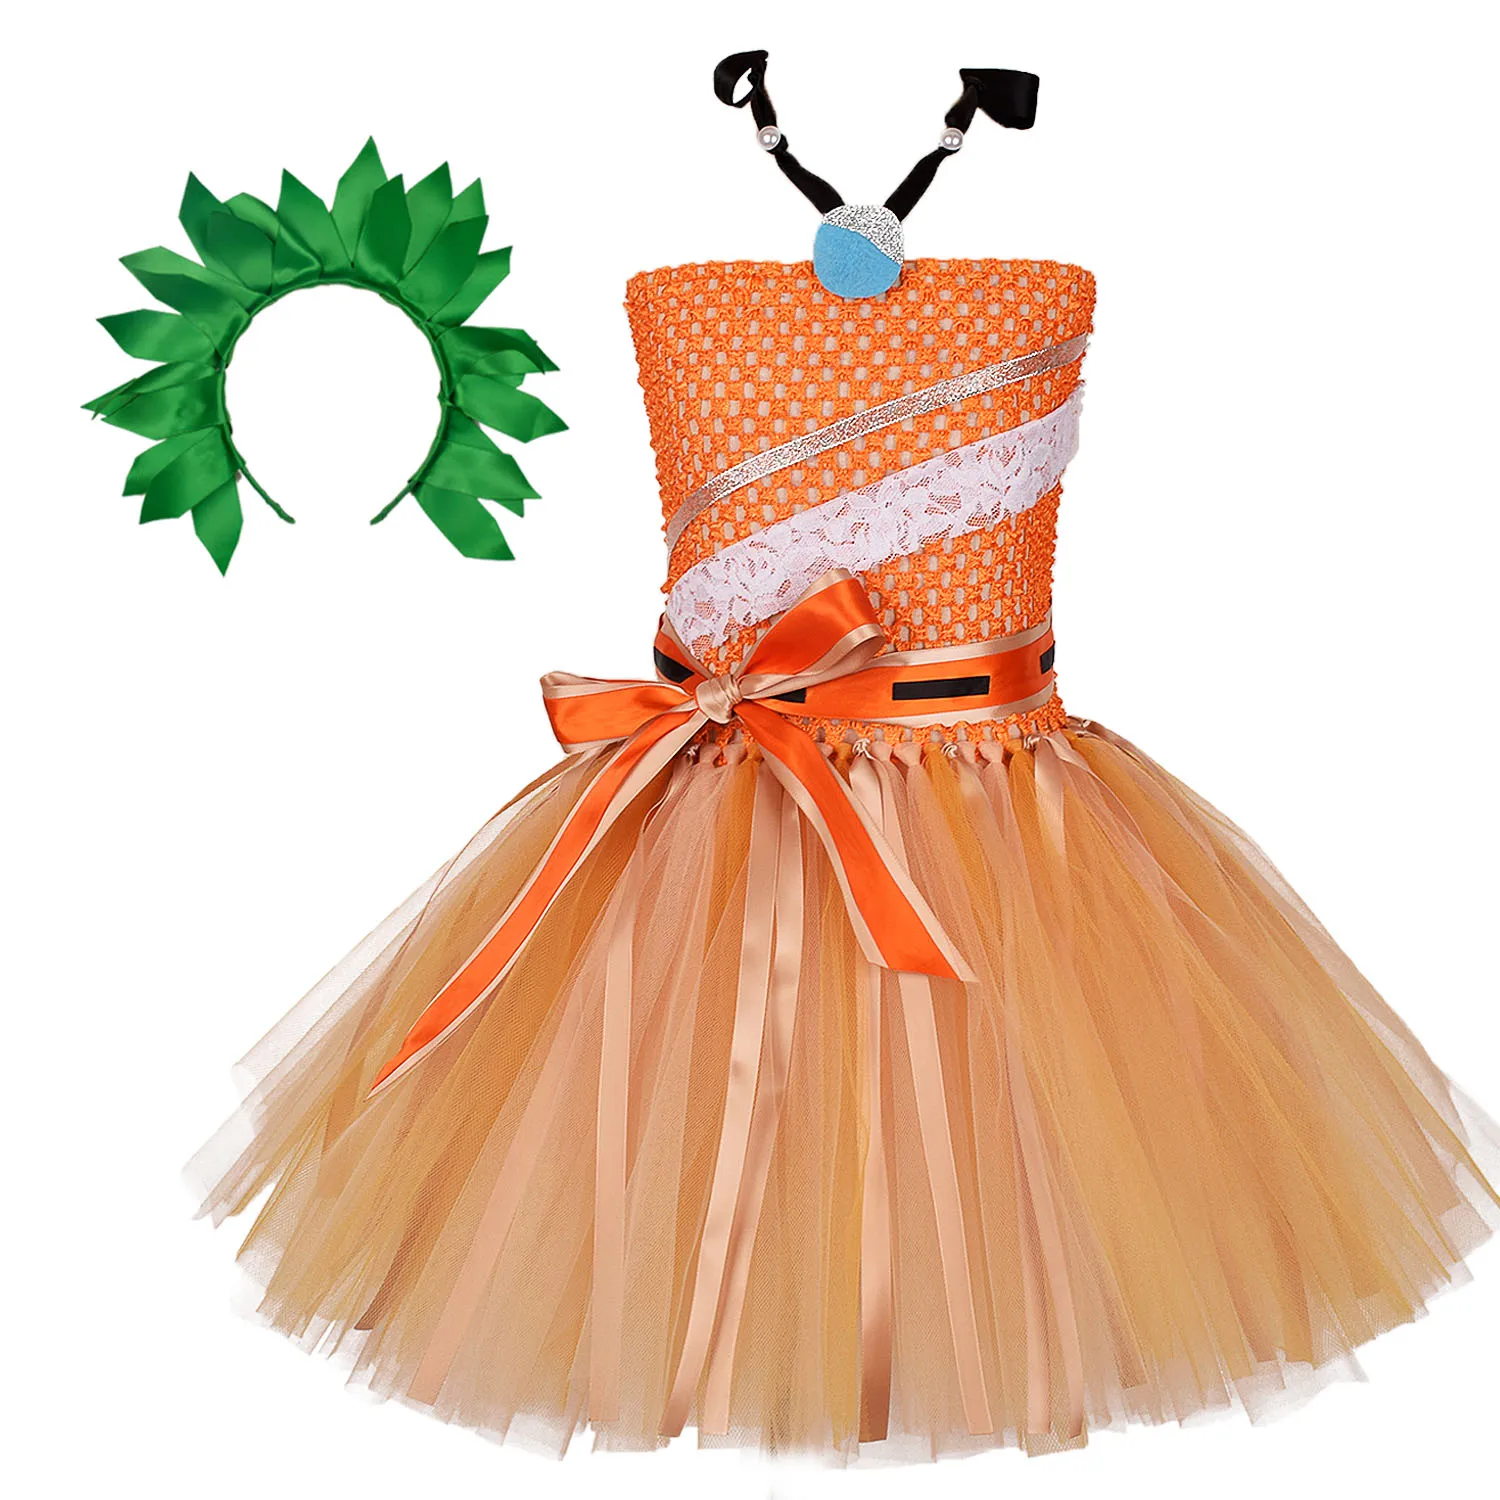 Princess Moana Tutu Dress For Girls Birthday Party Dresses Kids Cosplay Oufit Halloween Costume Toddler Photo Props 0-12Y